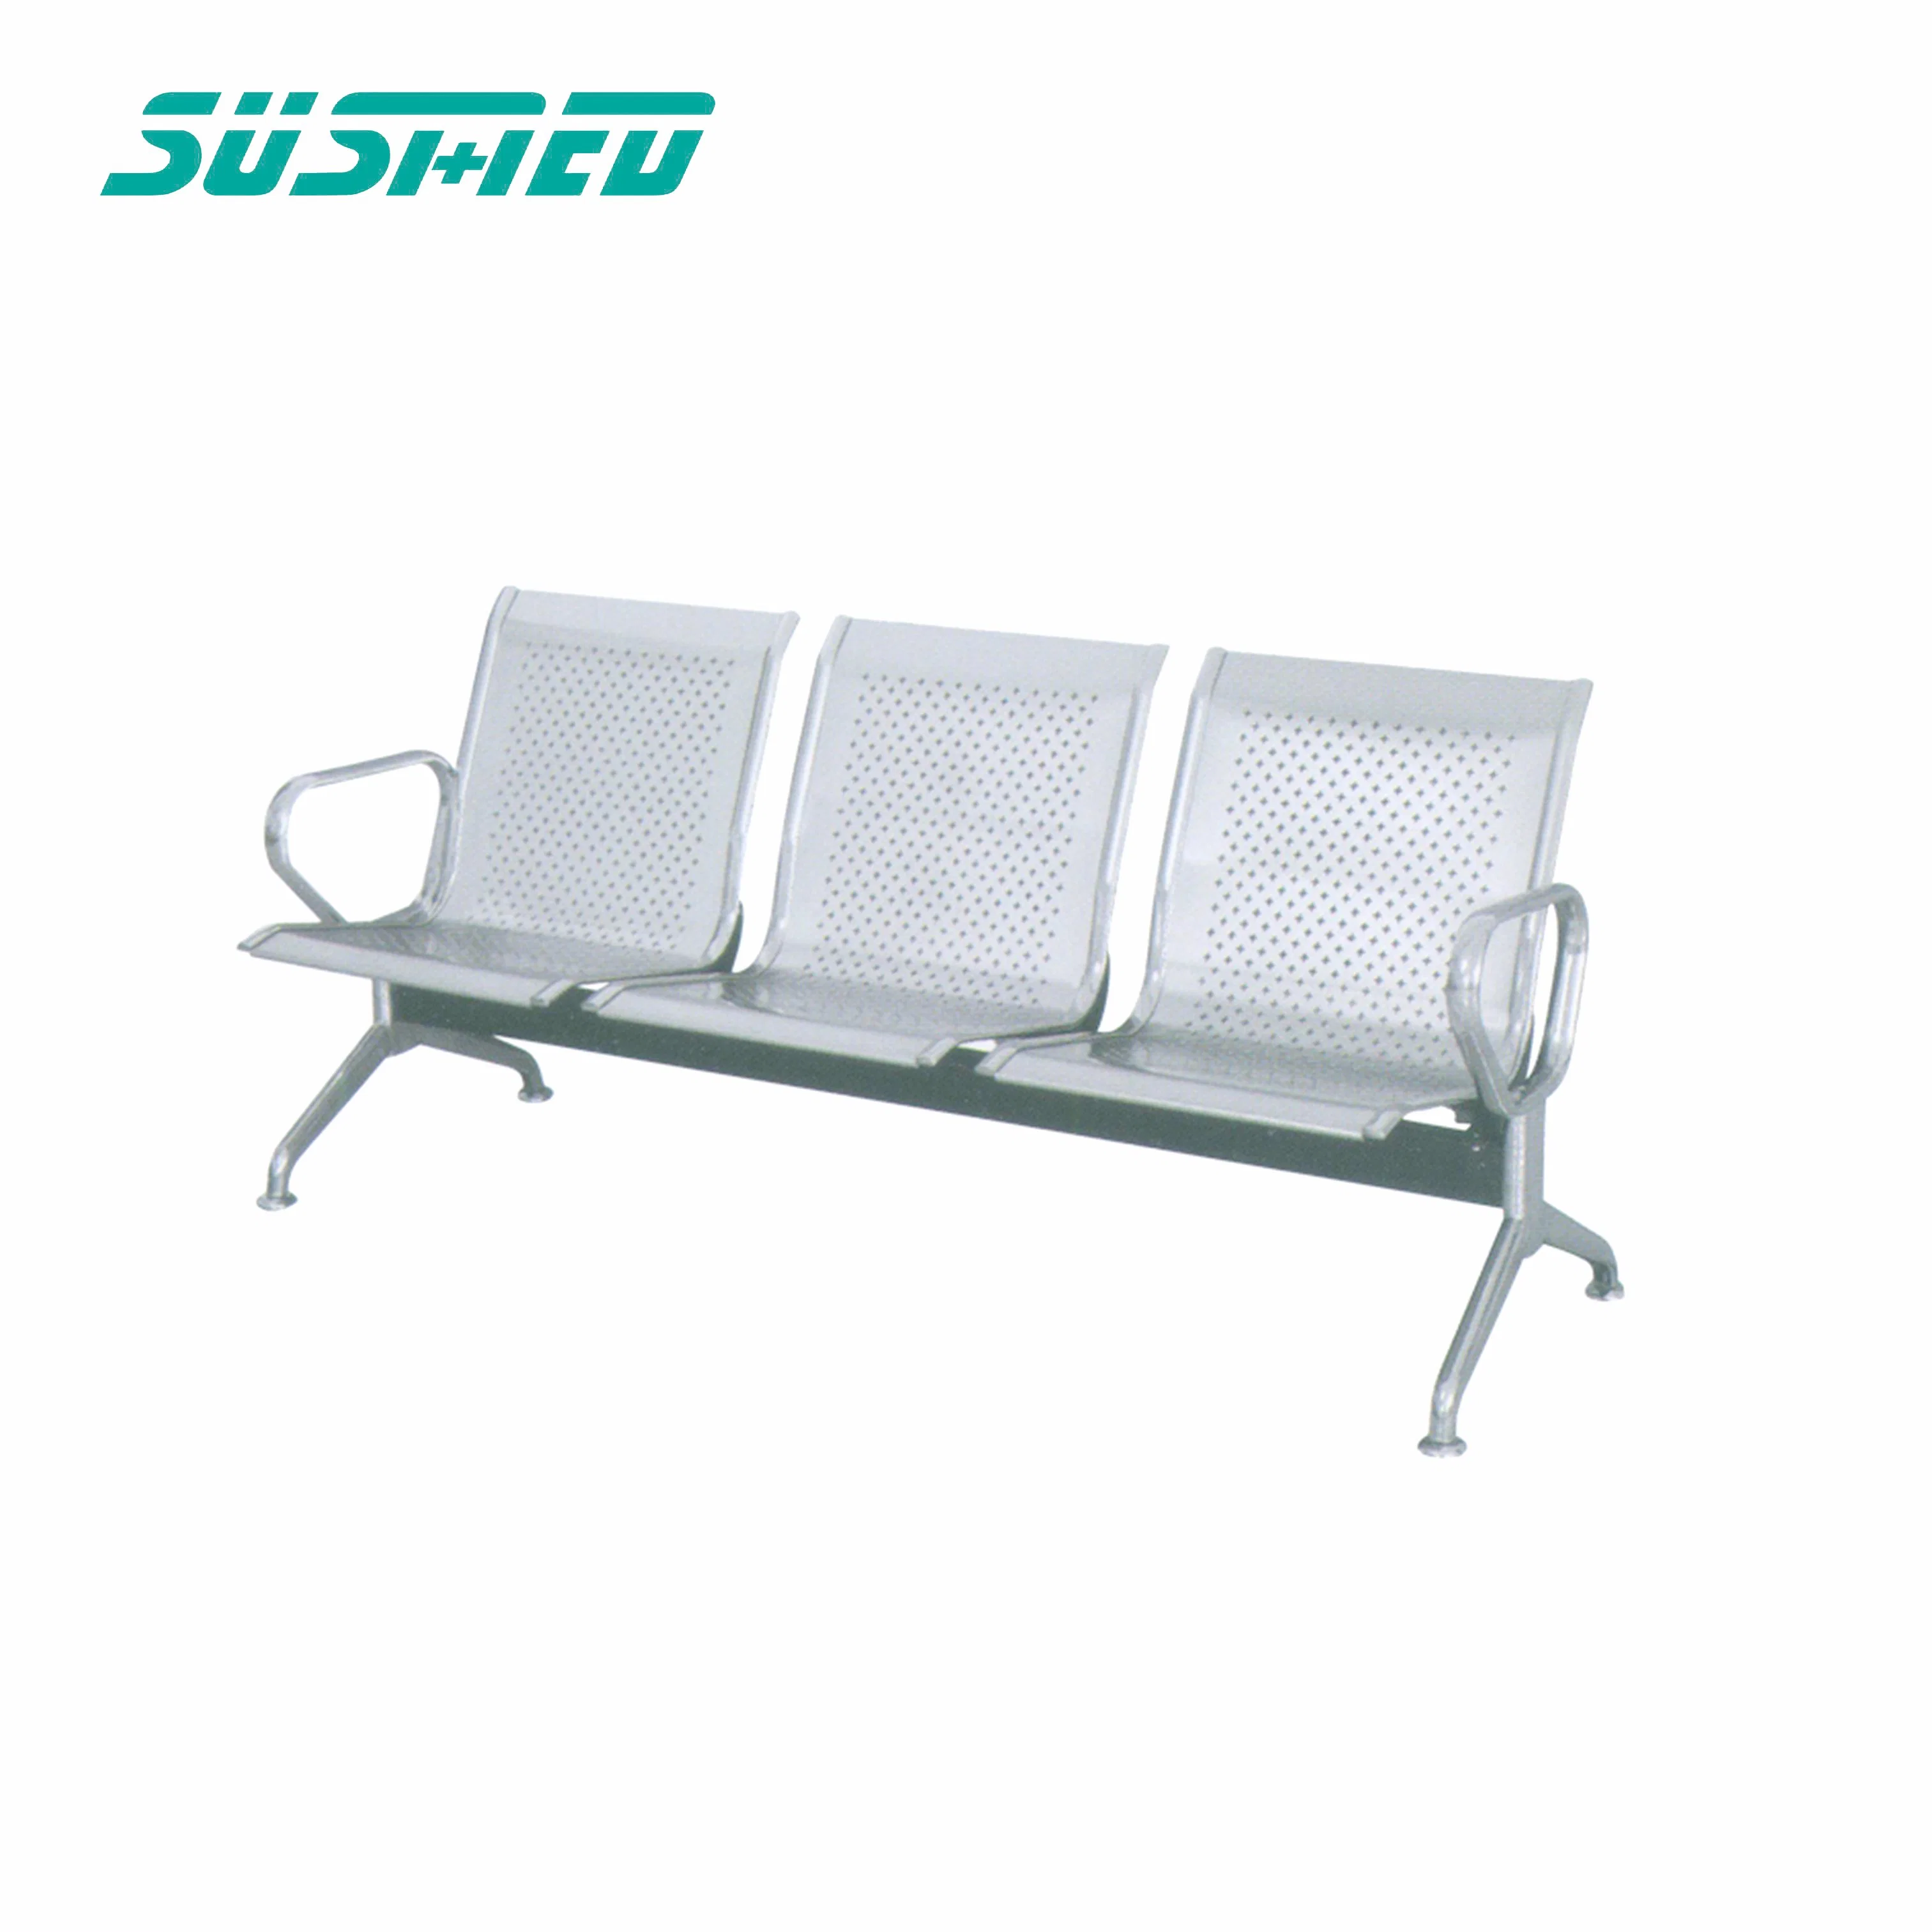 Seating Bench Without Arm Steel Hospital Waiting Chair Public 3-Seater Airport Line Chair